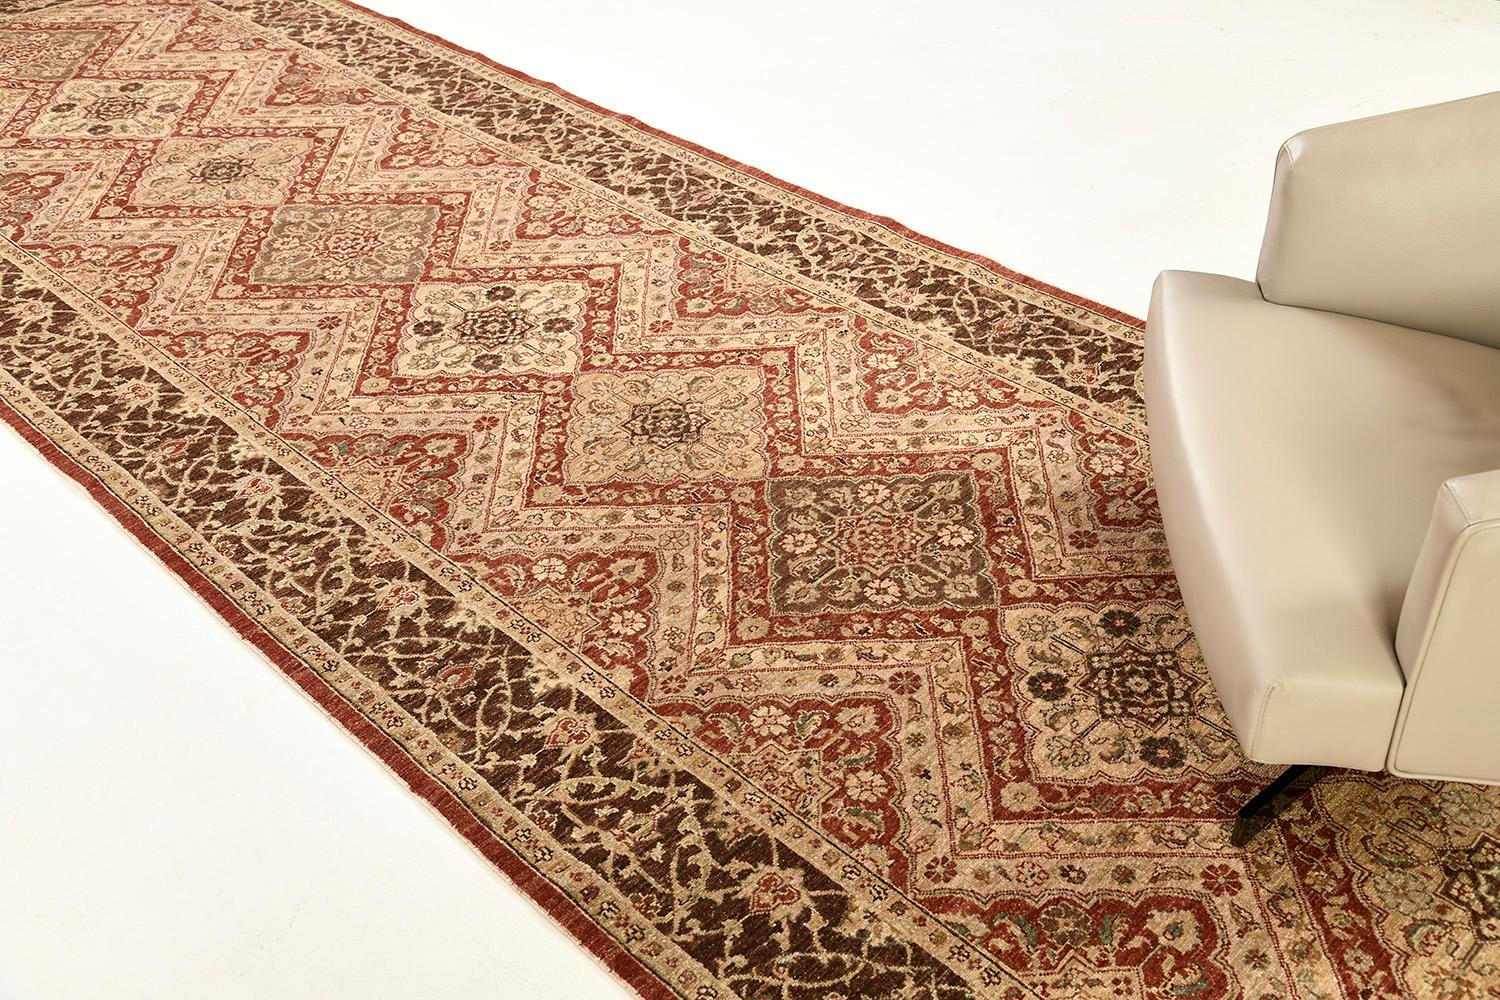 A Farahan revival that makes every guest stunned, which the borders harmoniously contribute to the florid motifs. Brilliant elegant tones enhance the beauty of the runner and will match in any space you want. Traditional home-style and mid-century